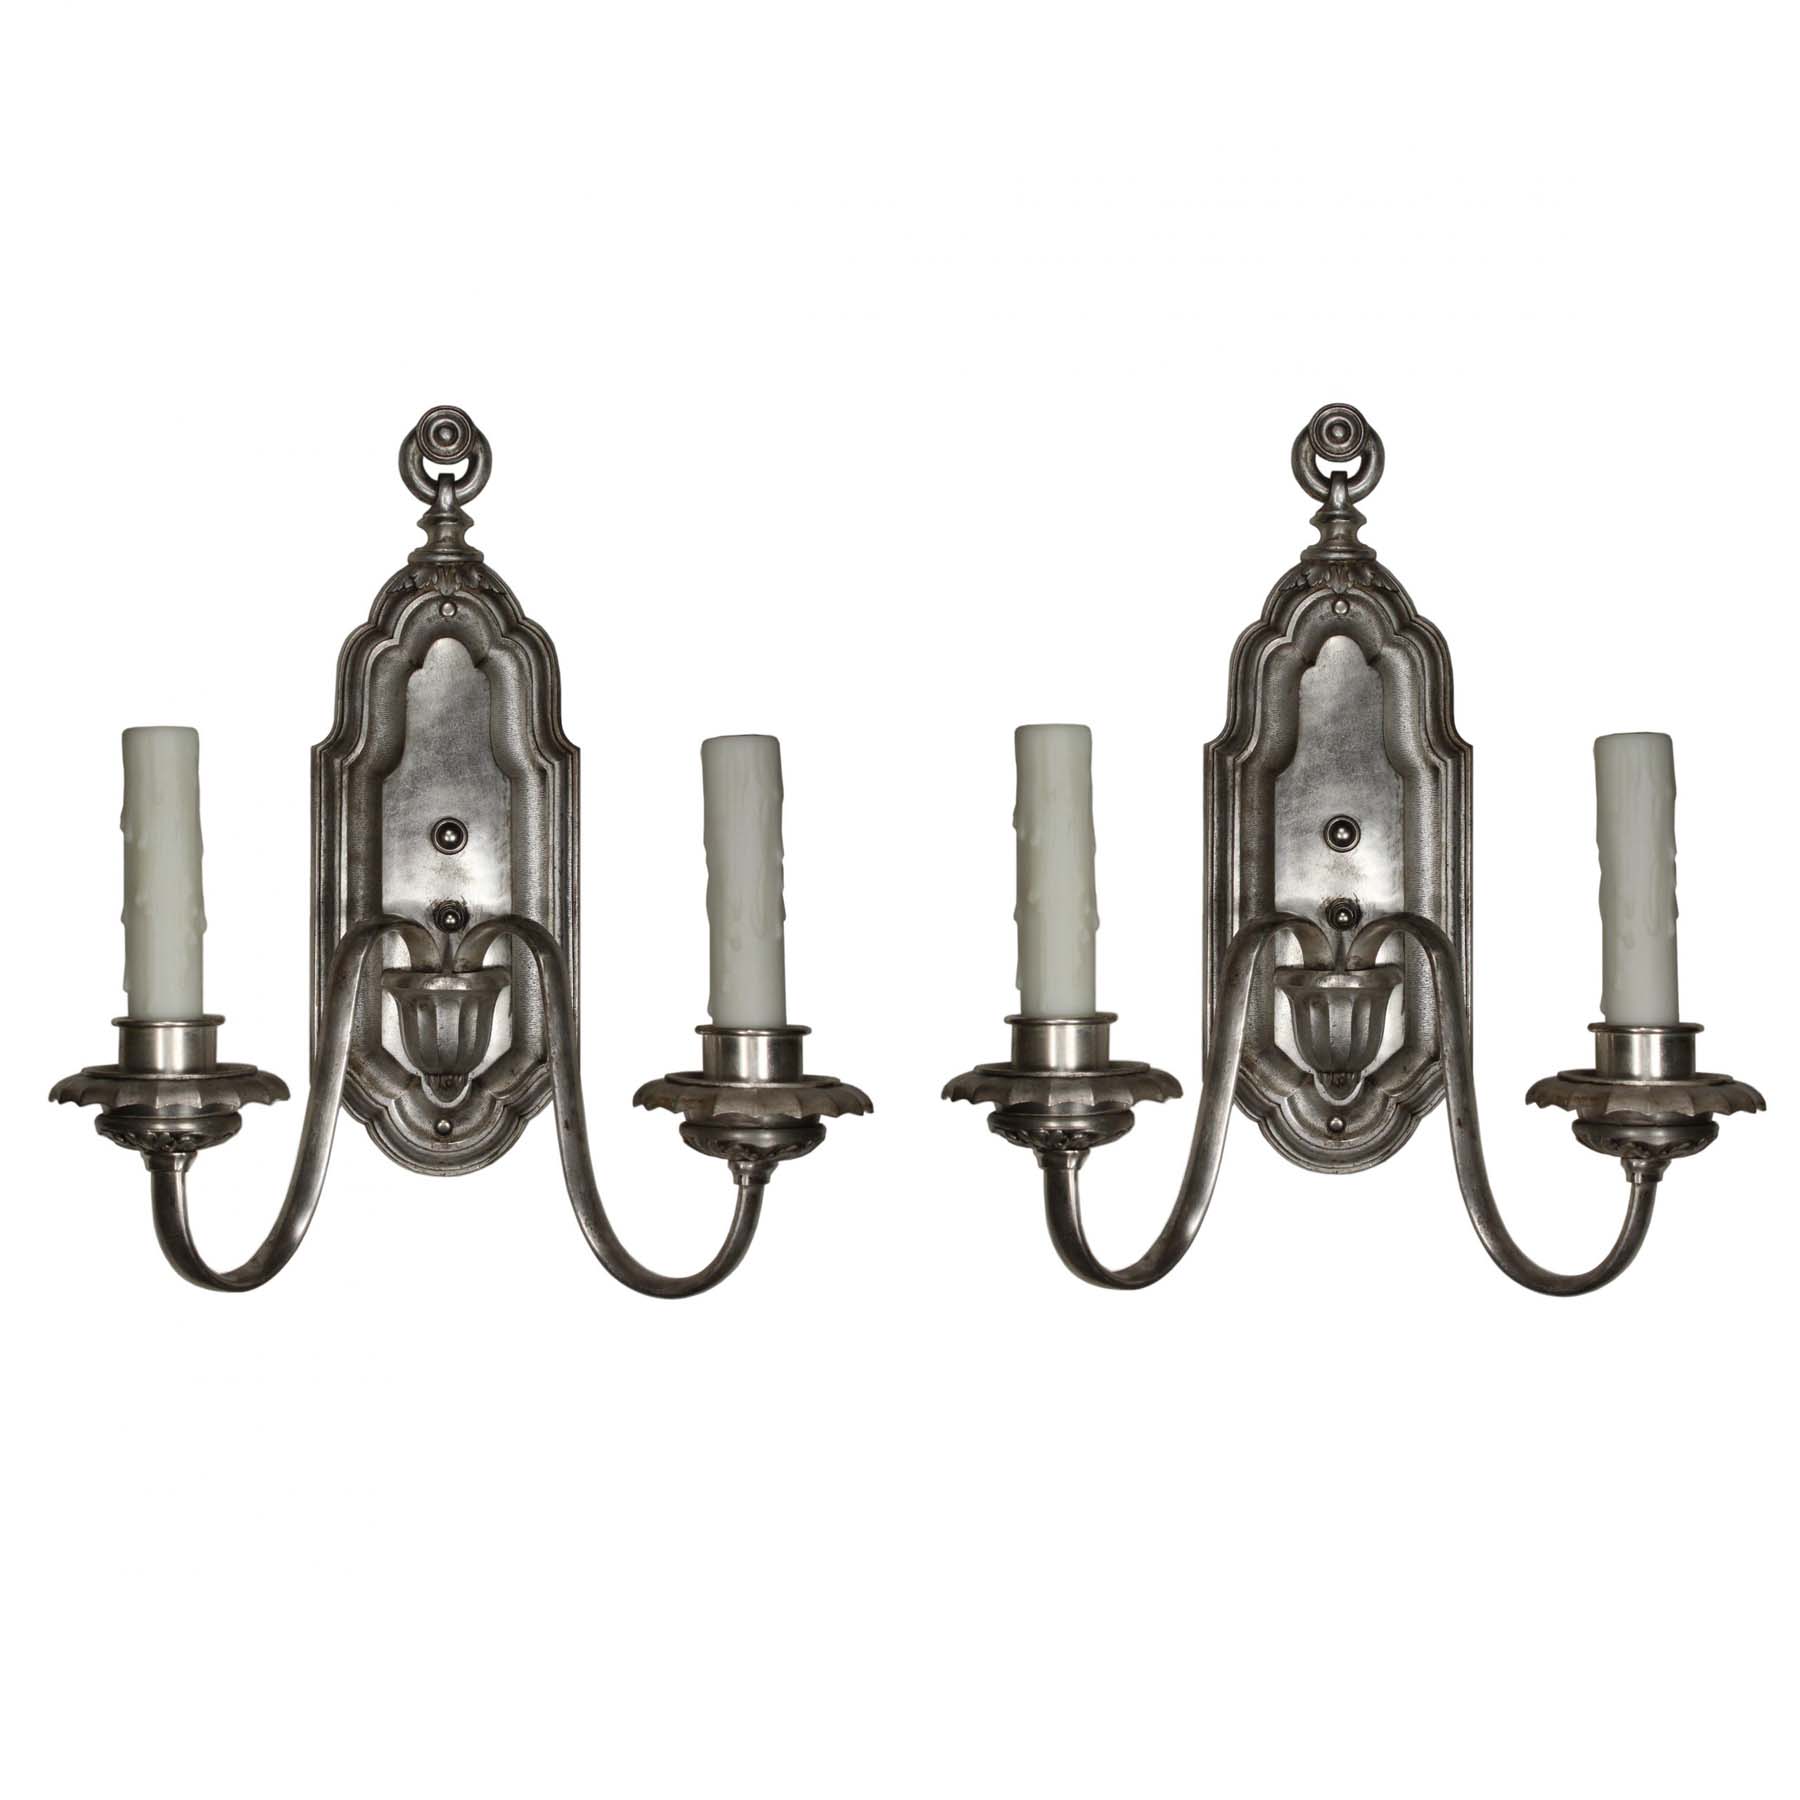 Pair of Silver Plated Neoclassical Sconces Signed Edward Miller, Antique Lighting-0